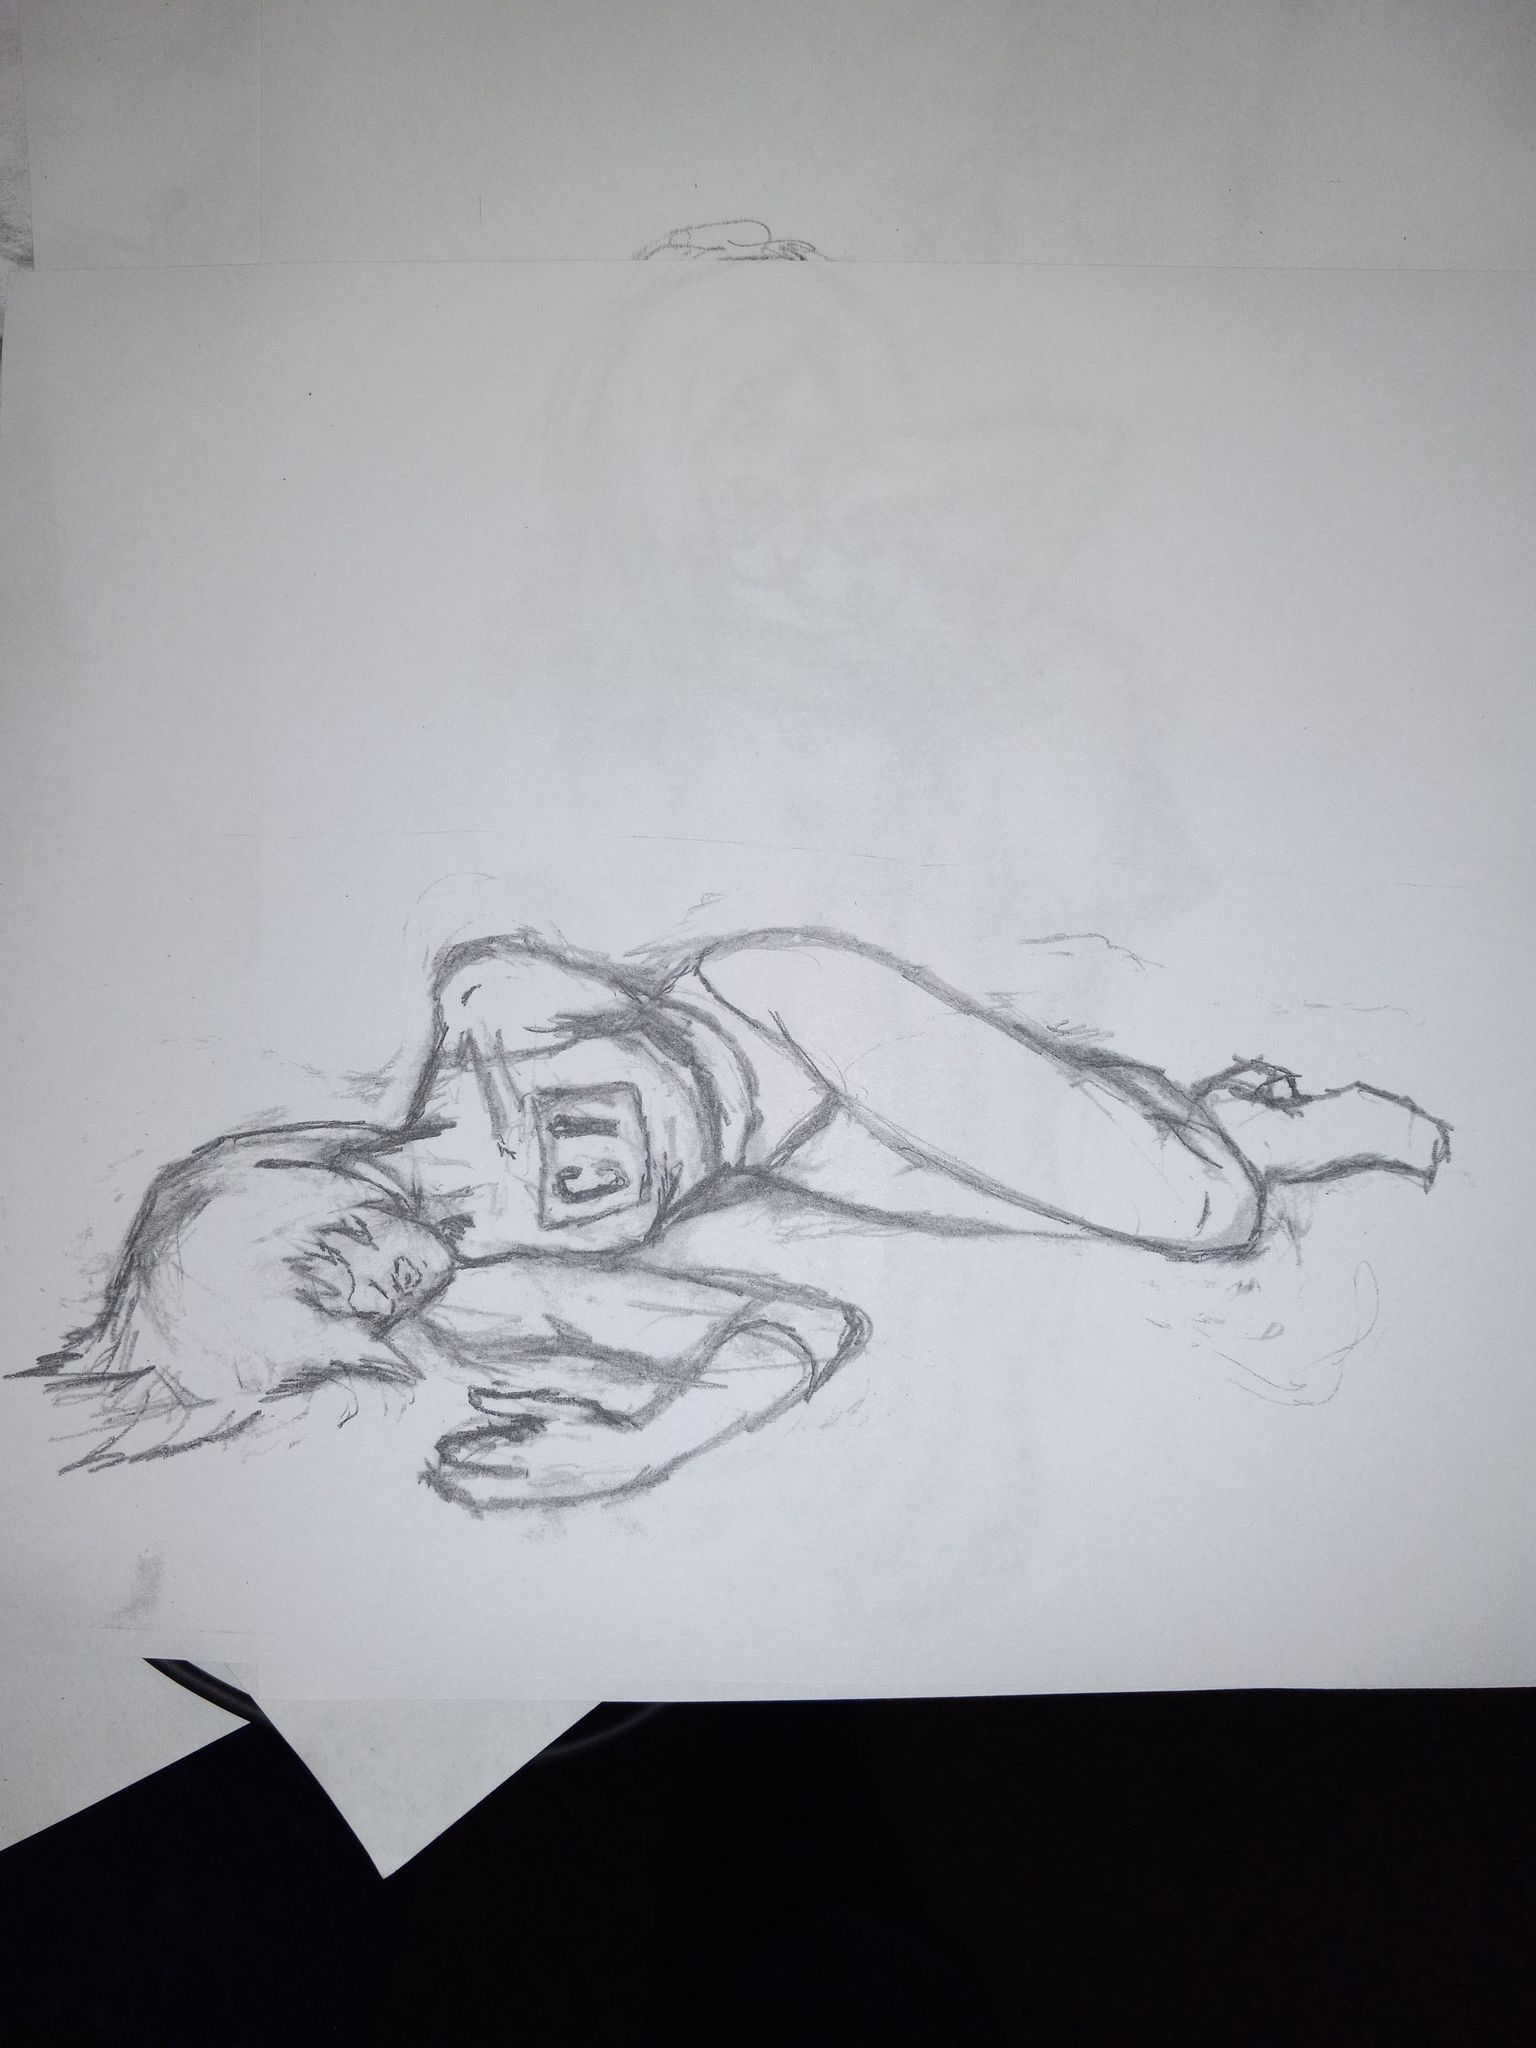 Issue 3 page 5 panel 4 chlorina passed out on floor.jpg